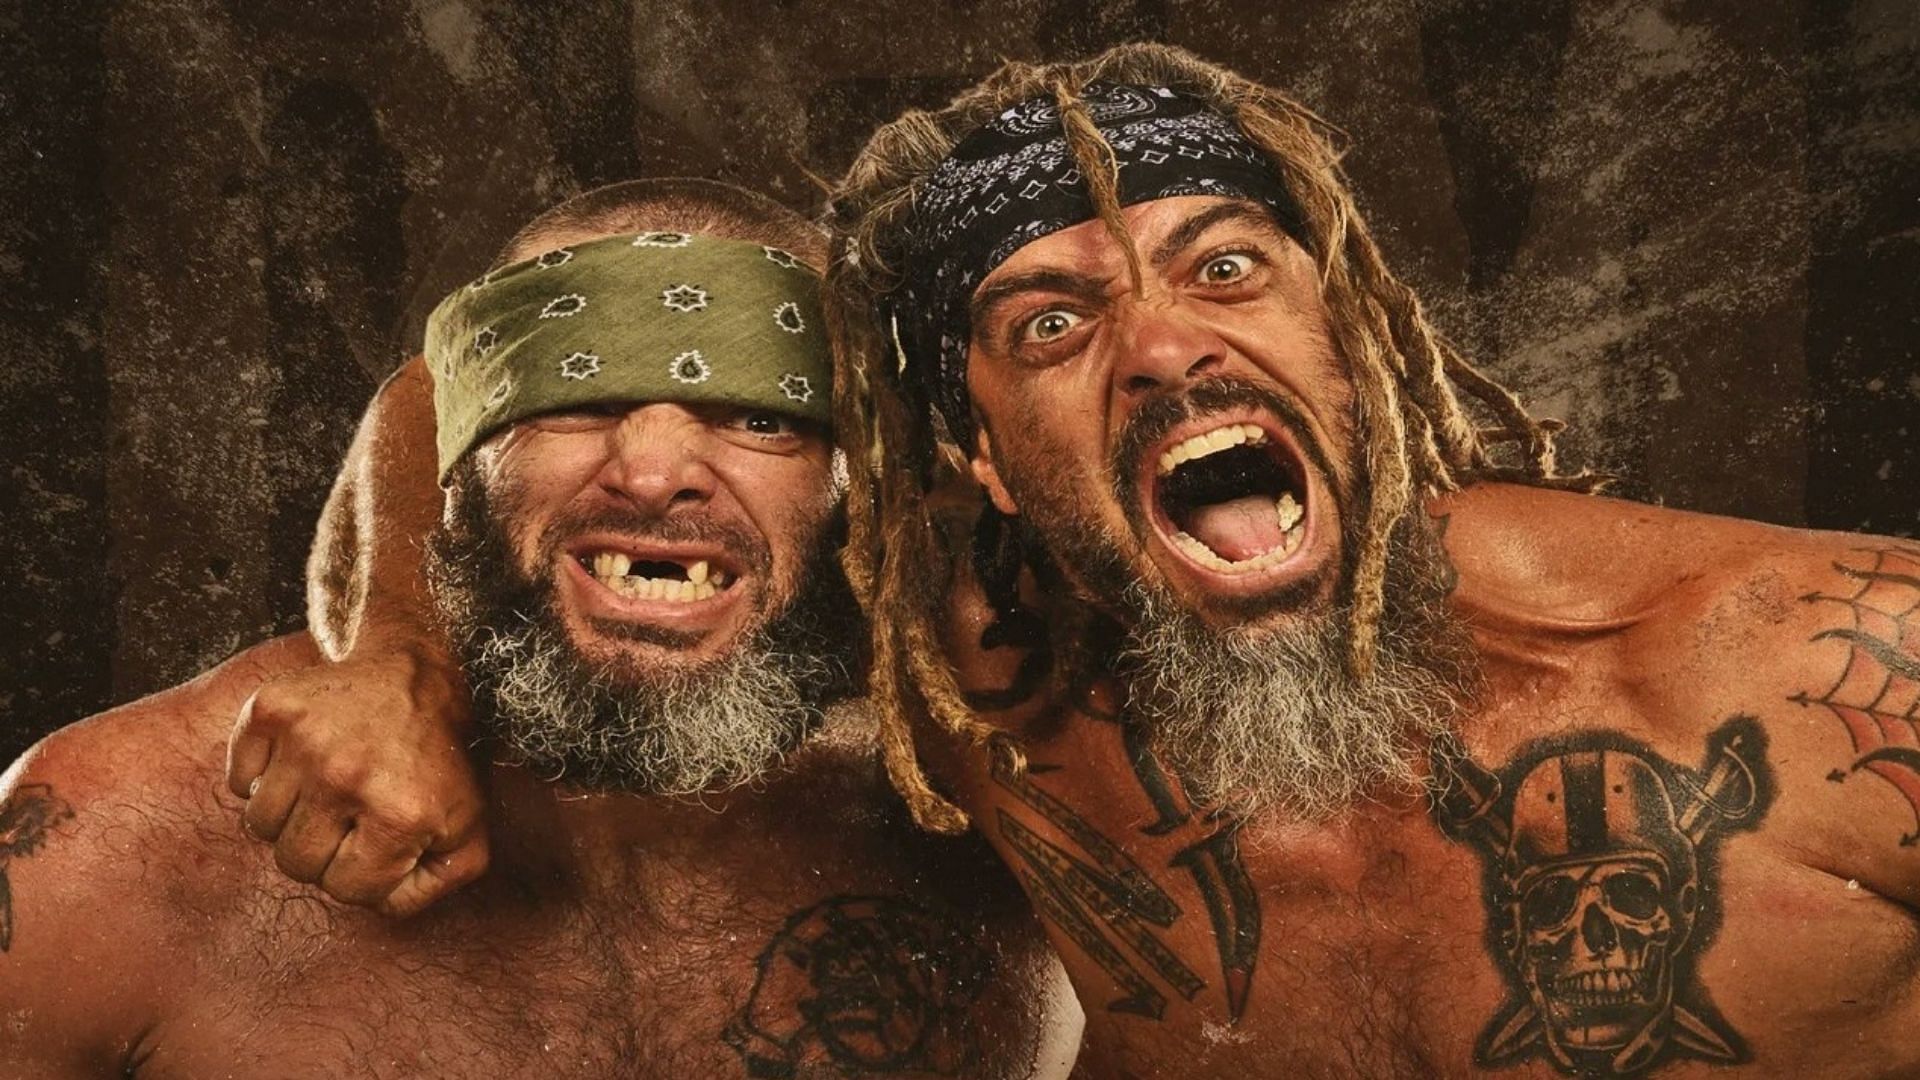 The Briscoes await confirmation on a match with former WWE tag team champions